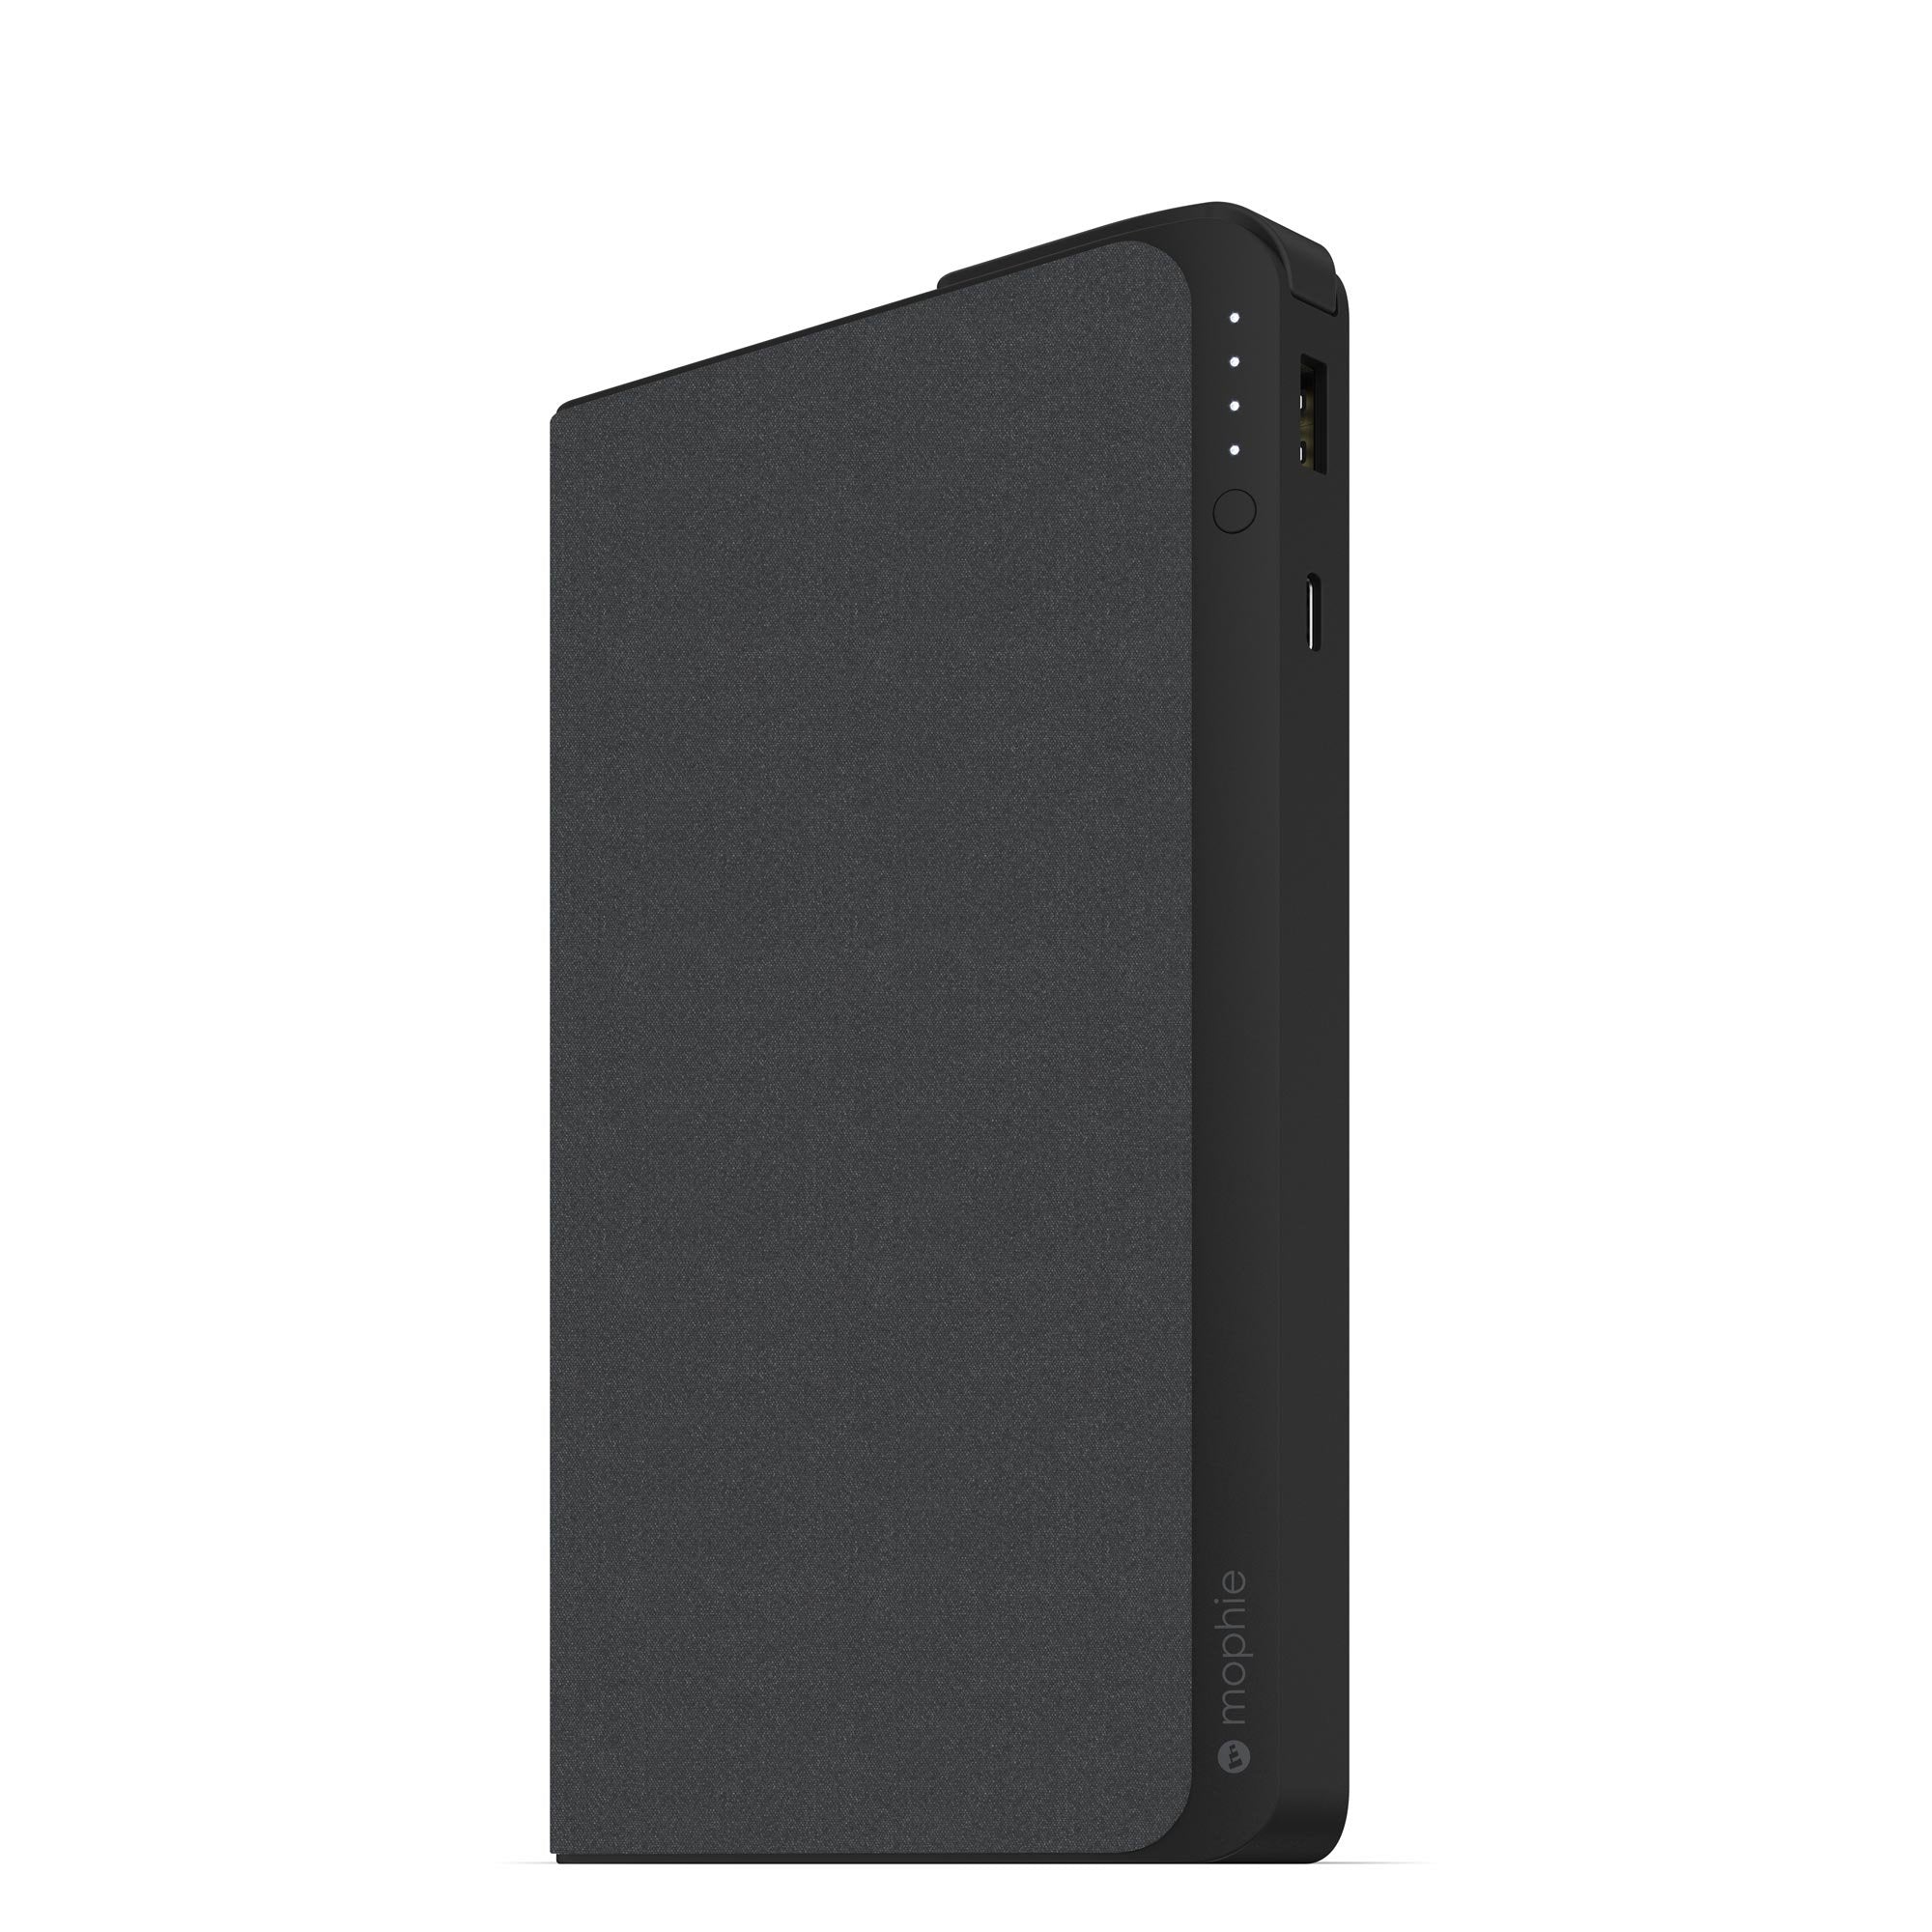 mophie powerstation powerstation AC - External Battery - Made for Laptops, Tablets, Smartphones and other USB & AC devices - Black